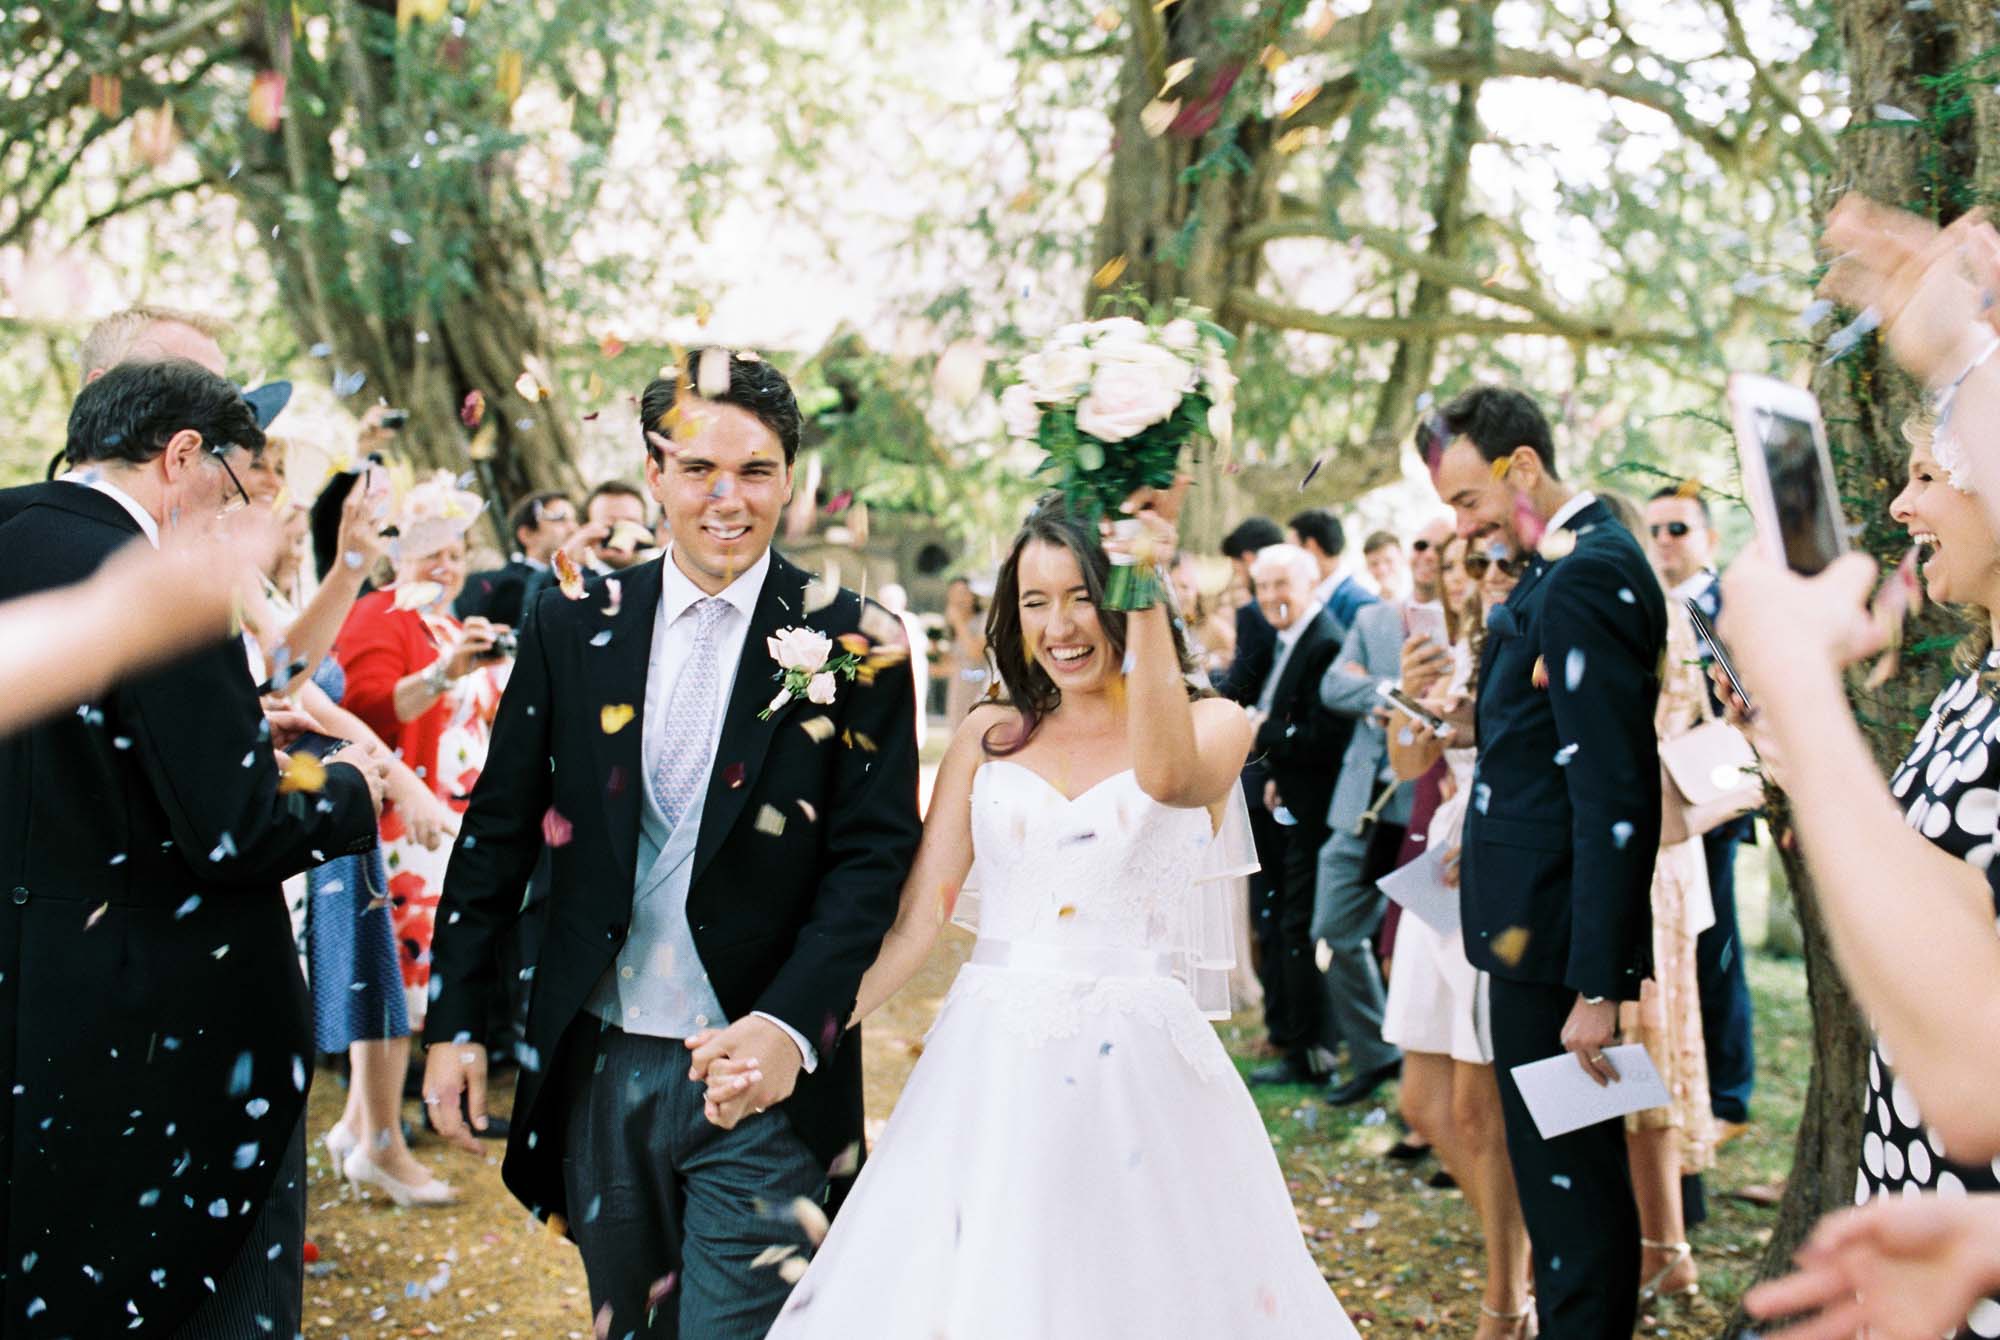 Bride and groom laughing in wedding confetti